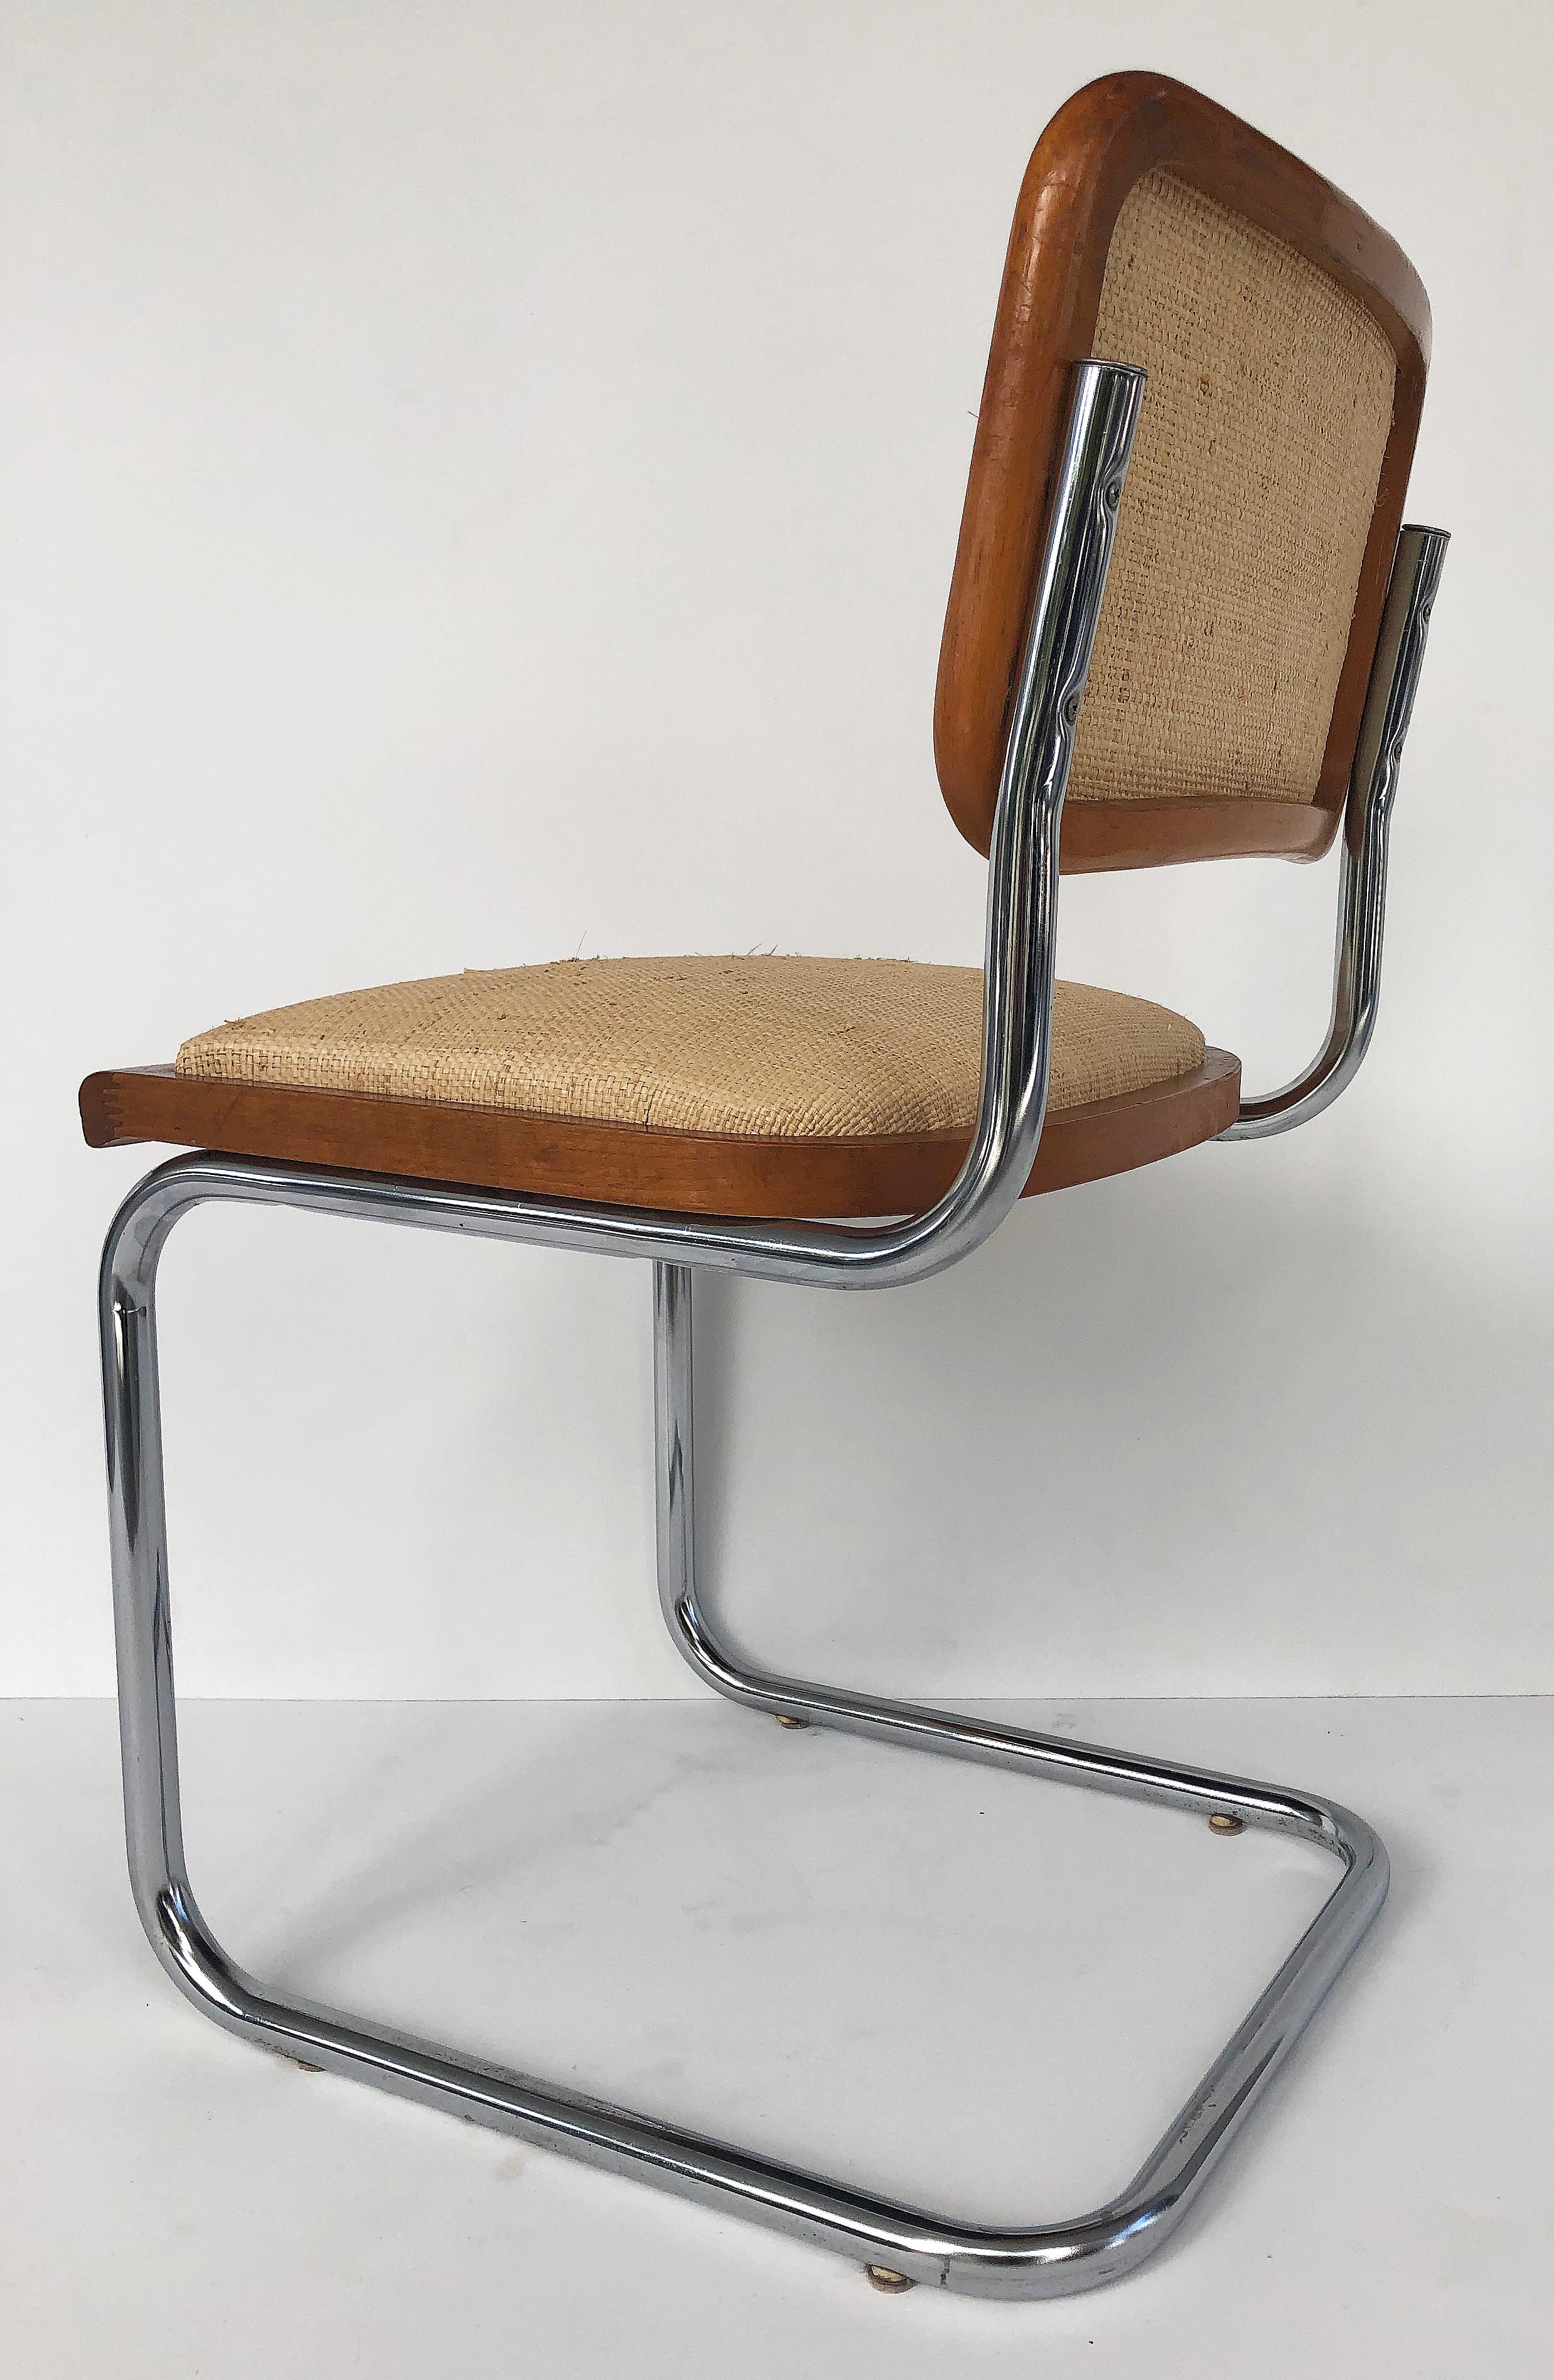 Marcel Breuer Knoll Chrome Cesca Chairs Upholstered in Raffia, Set of Four 2